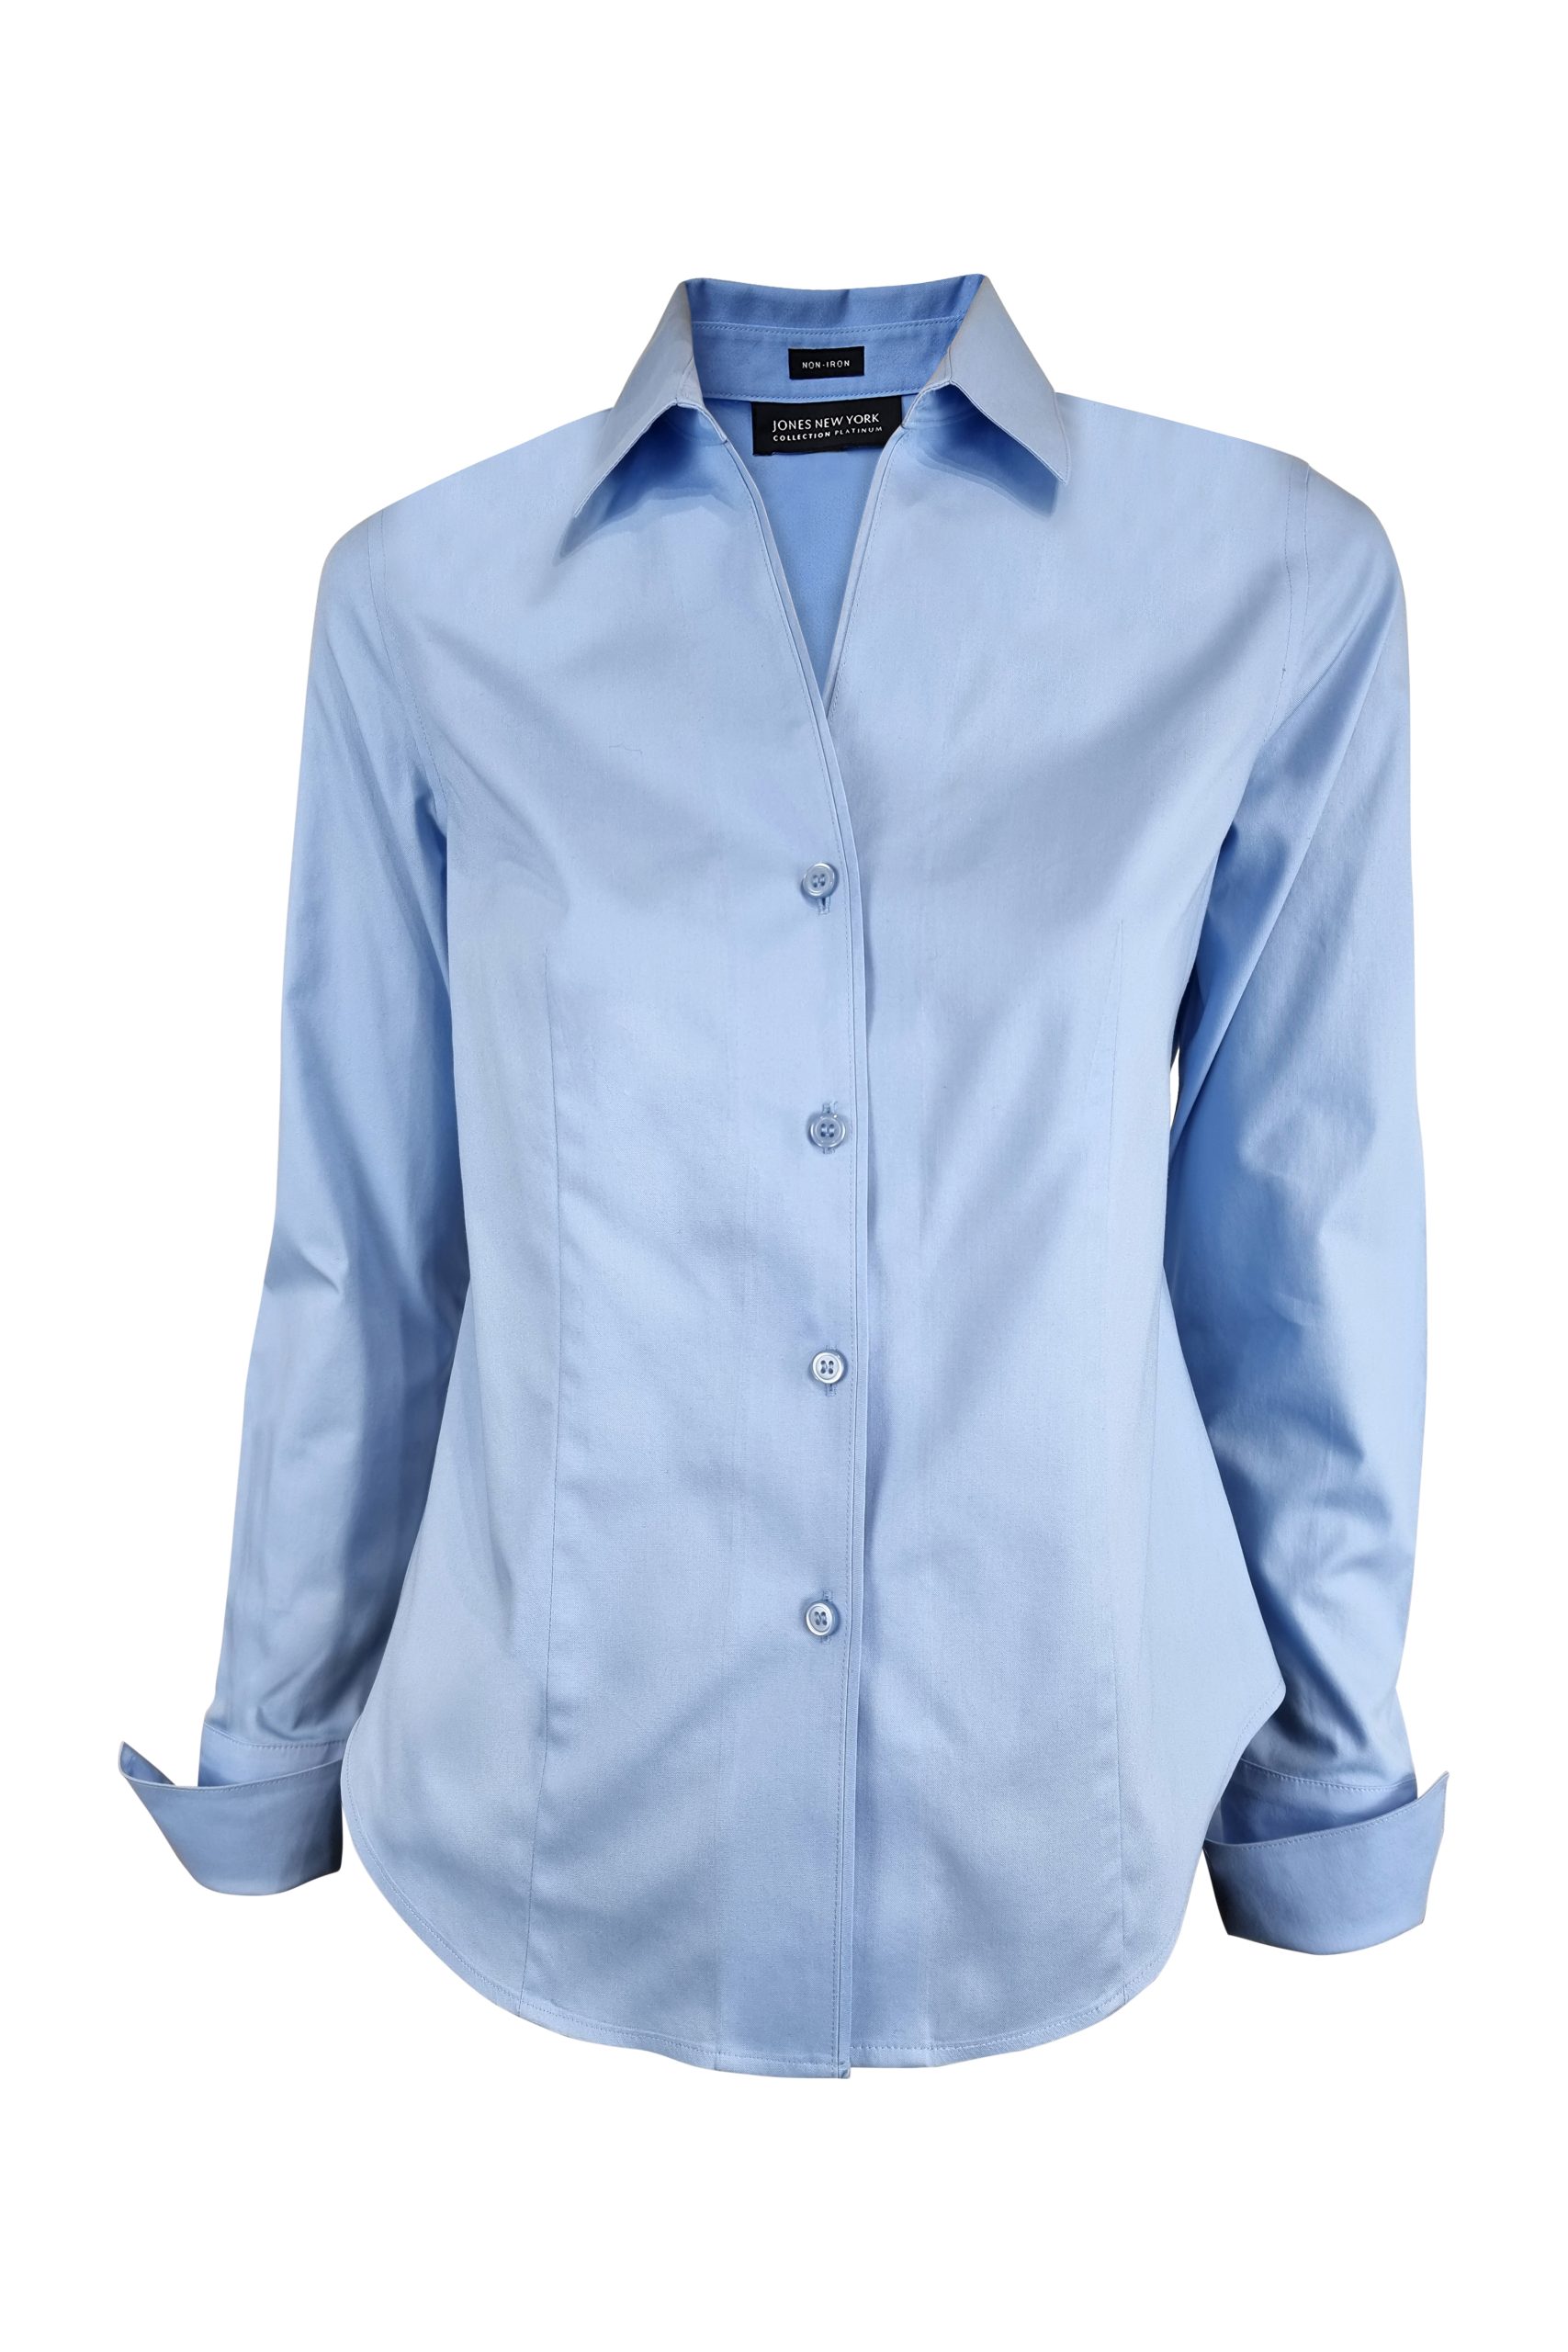 Easy Care Shirt - New Blue - Aarya's Exclusive